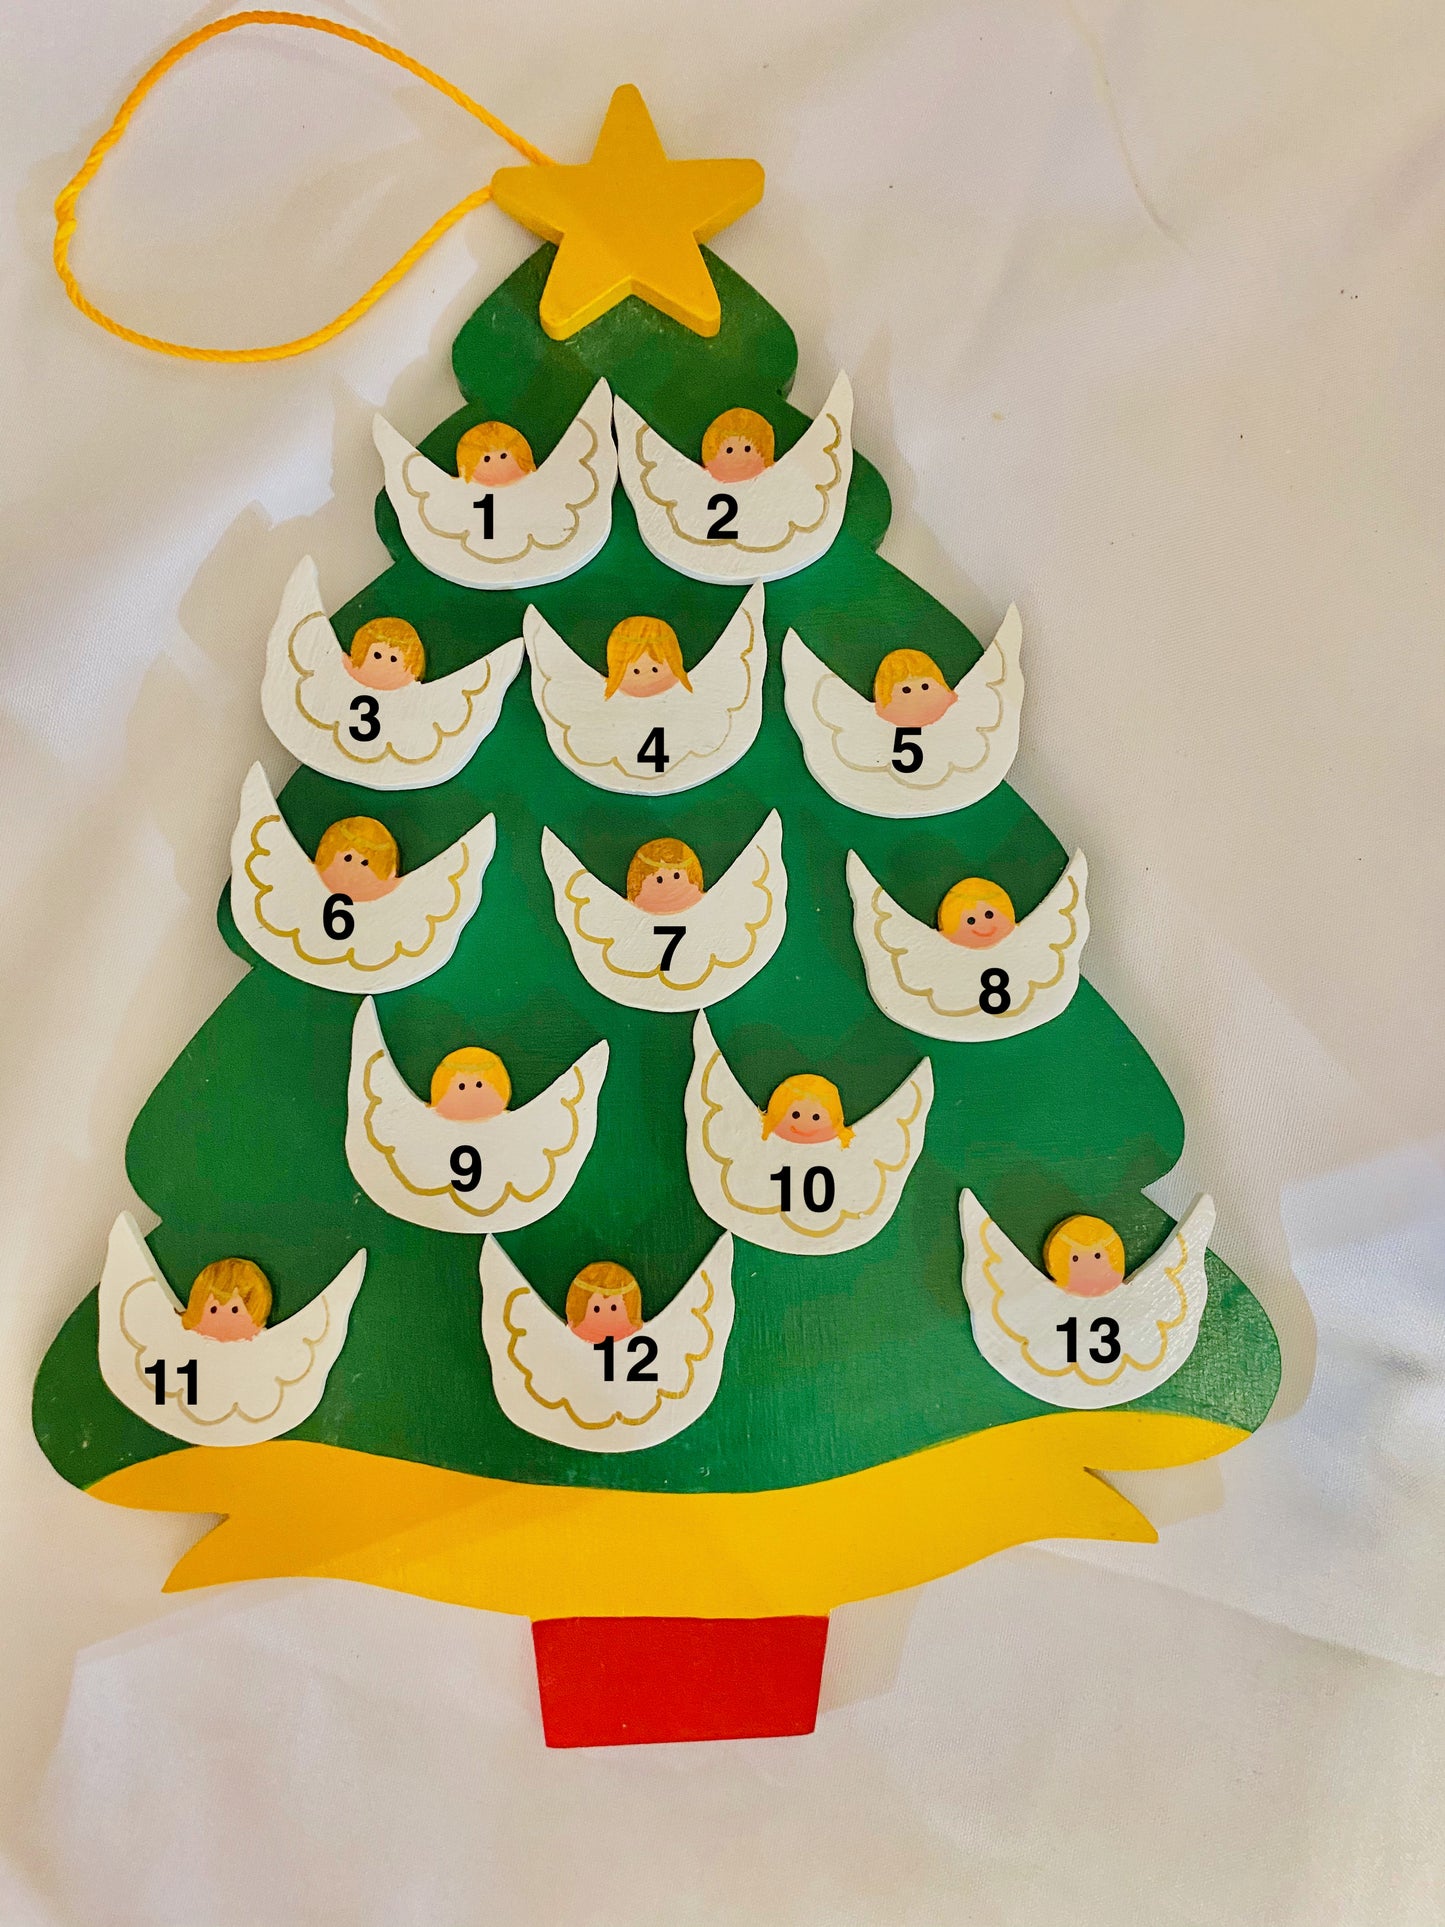 Personalized Ornament 13 Angels on a Christmas Trees  8.5" x 7"